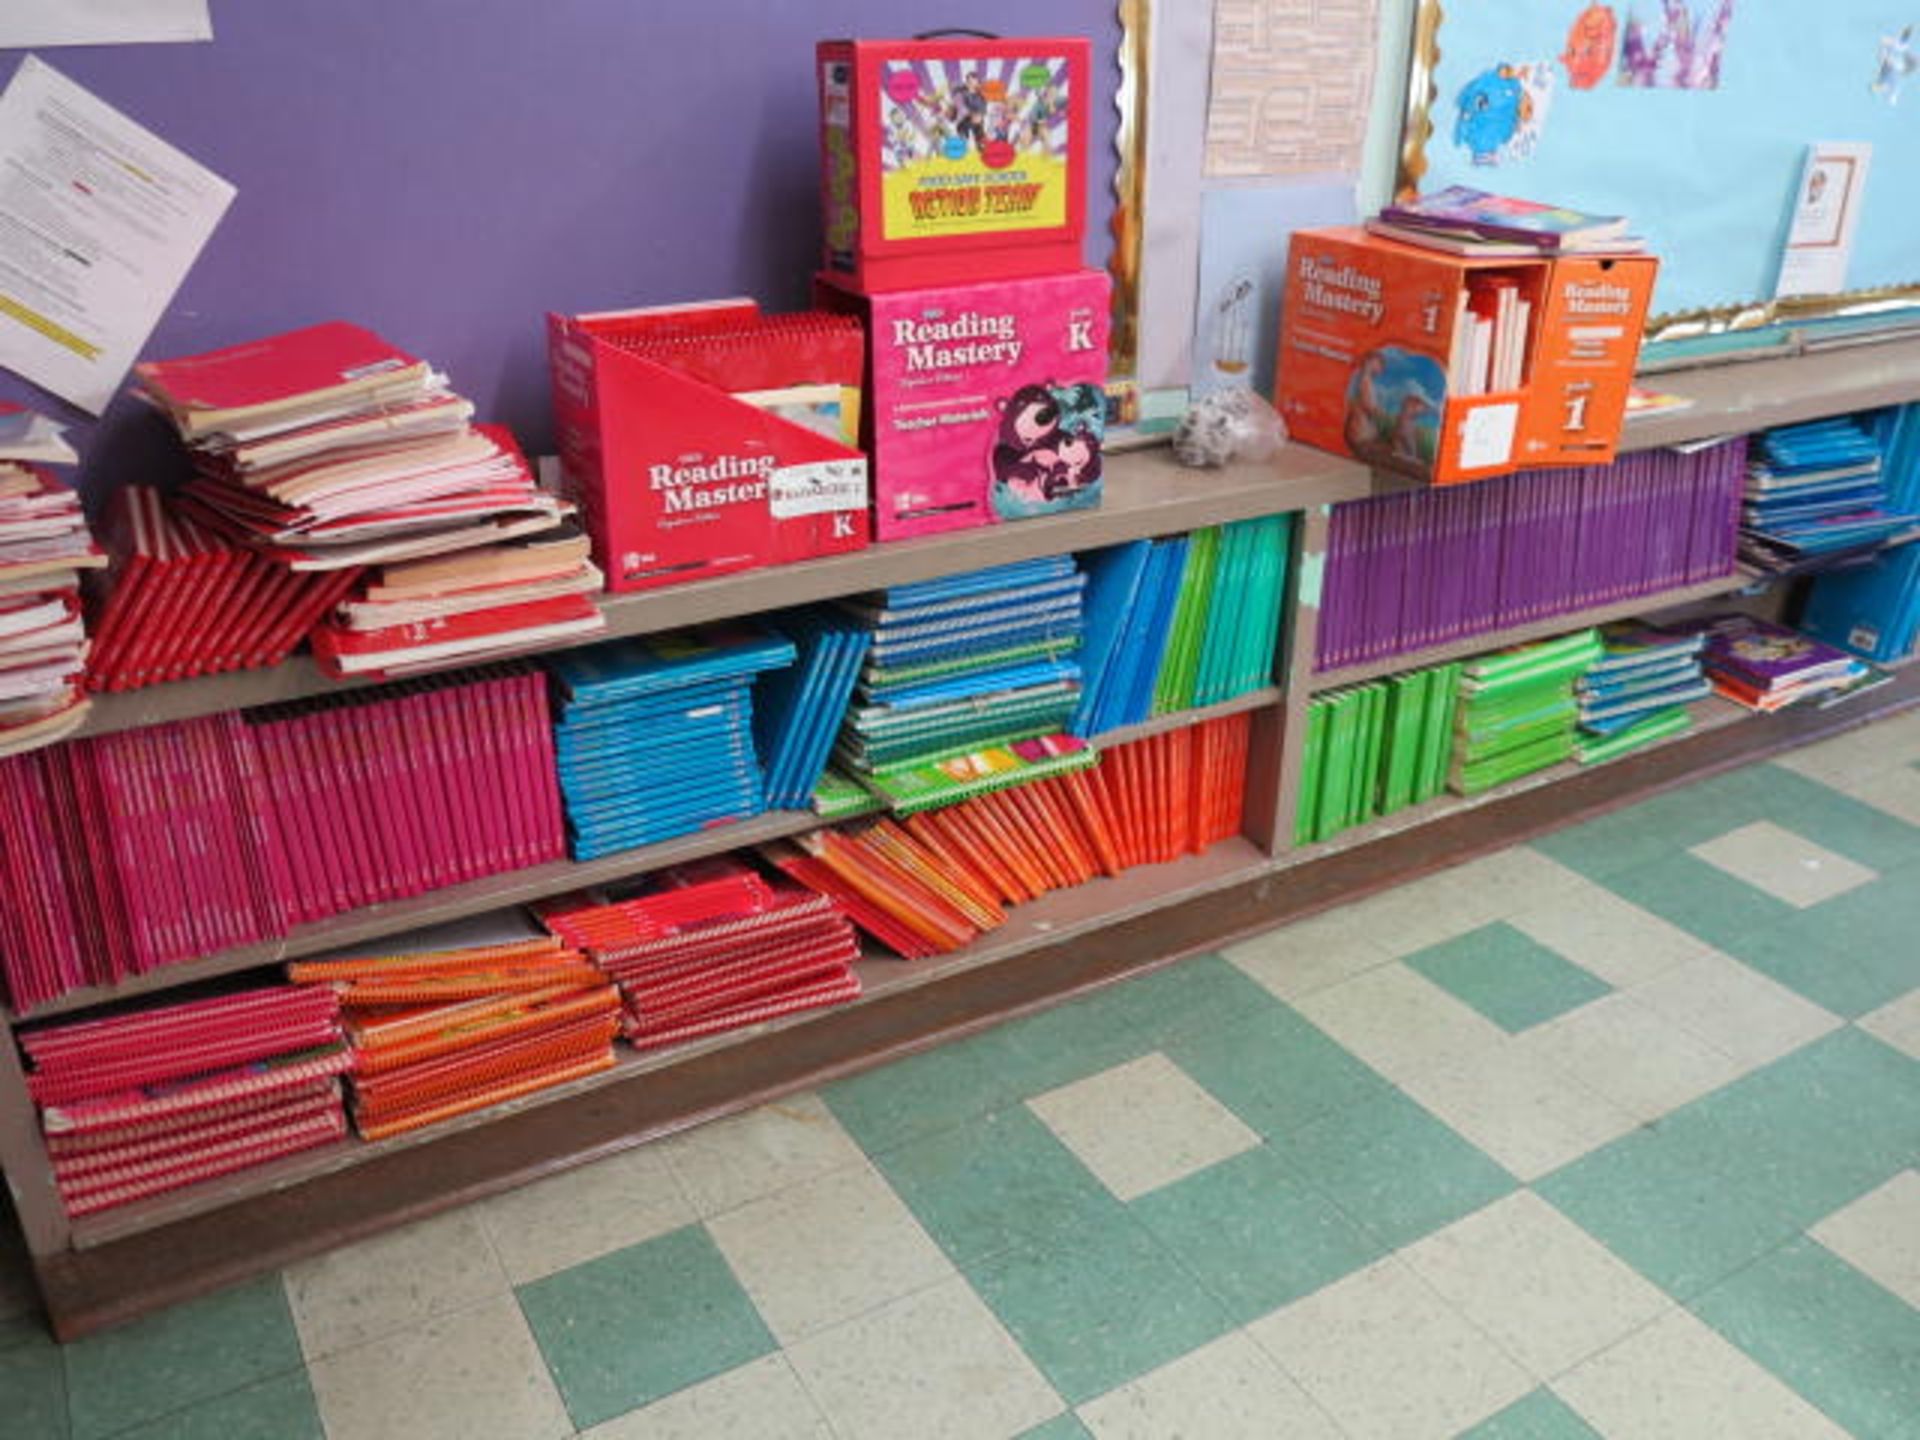 Lot Books Consisting of Curriculum Books and Novels Located in Room 13